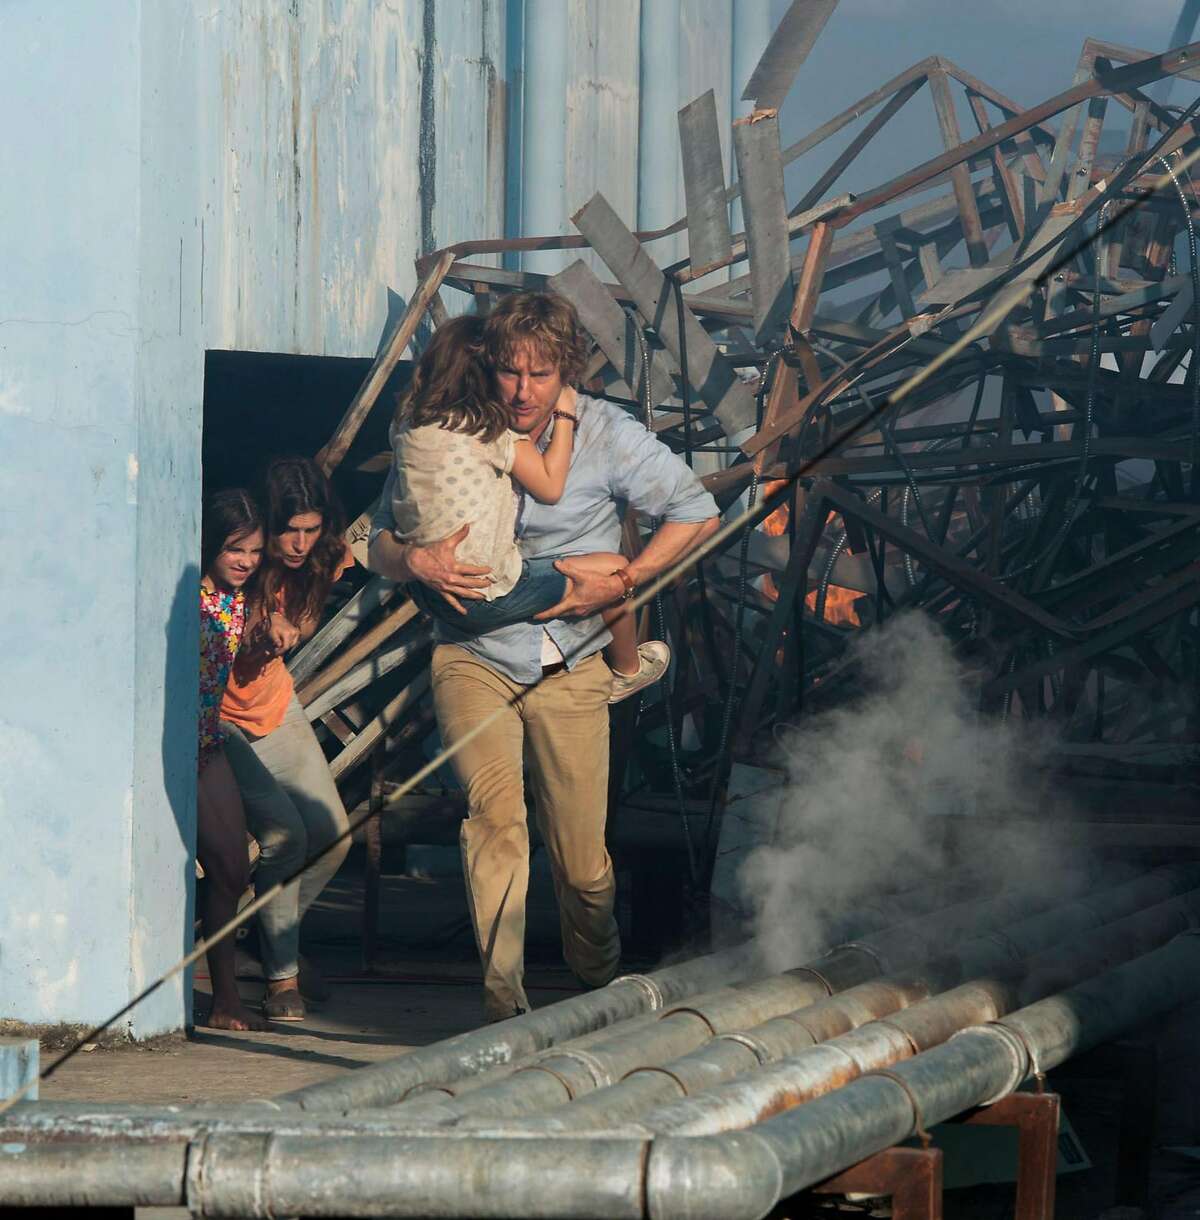 Owen Wilson and Lake Bell star in "No Escape." (Rolan Neveu/The Weinstein Company)